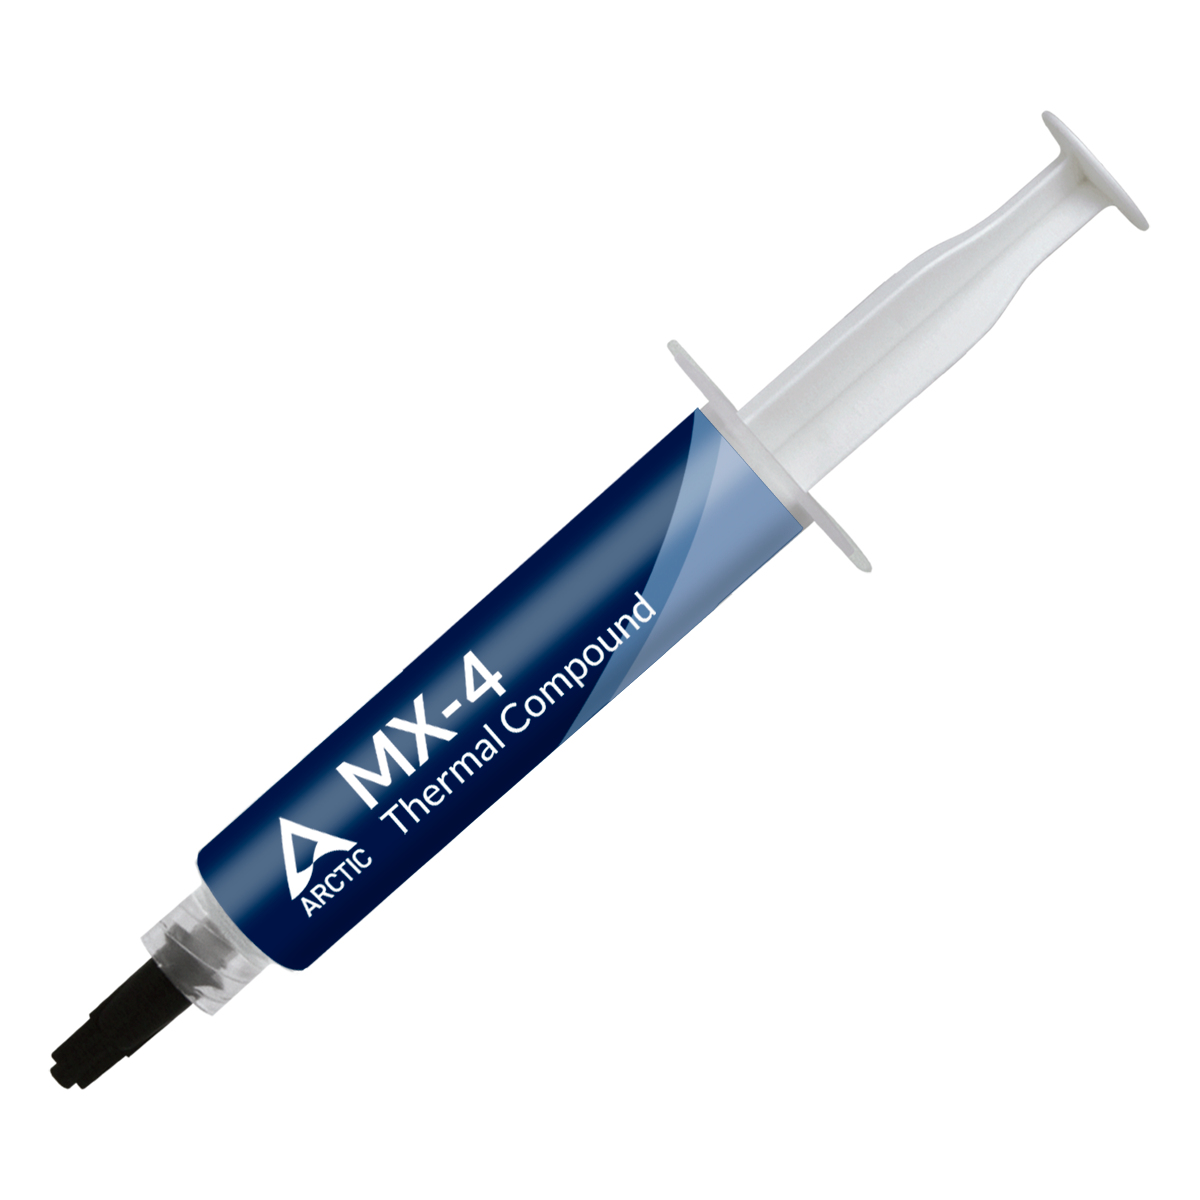 ARCTIC MX-4 (8 g) Edition 2019  High Performance Thermal Paste